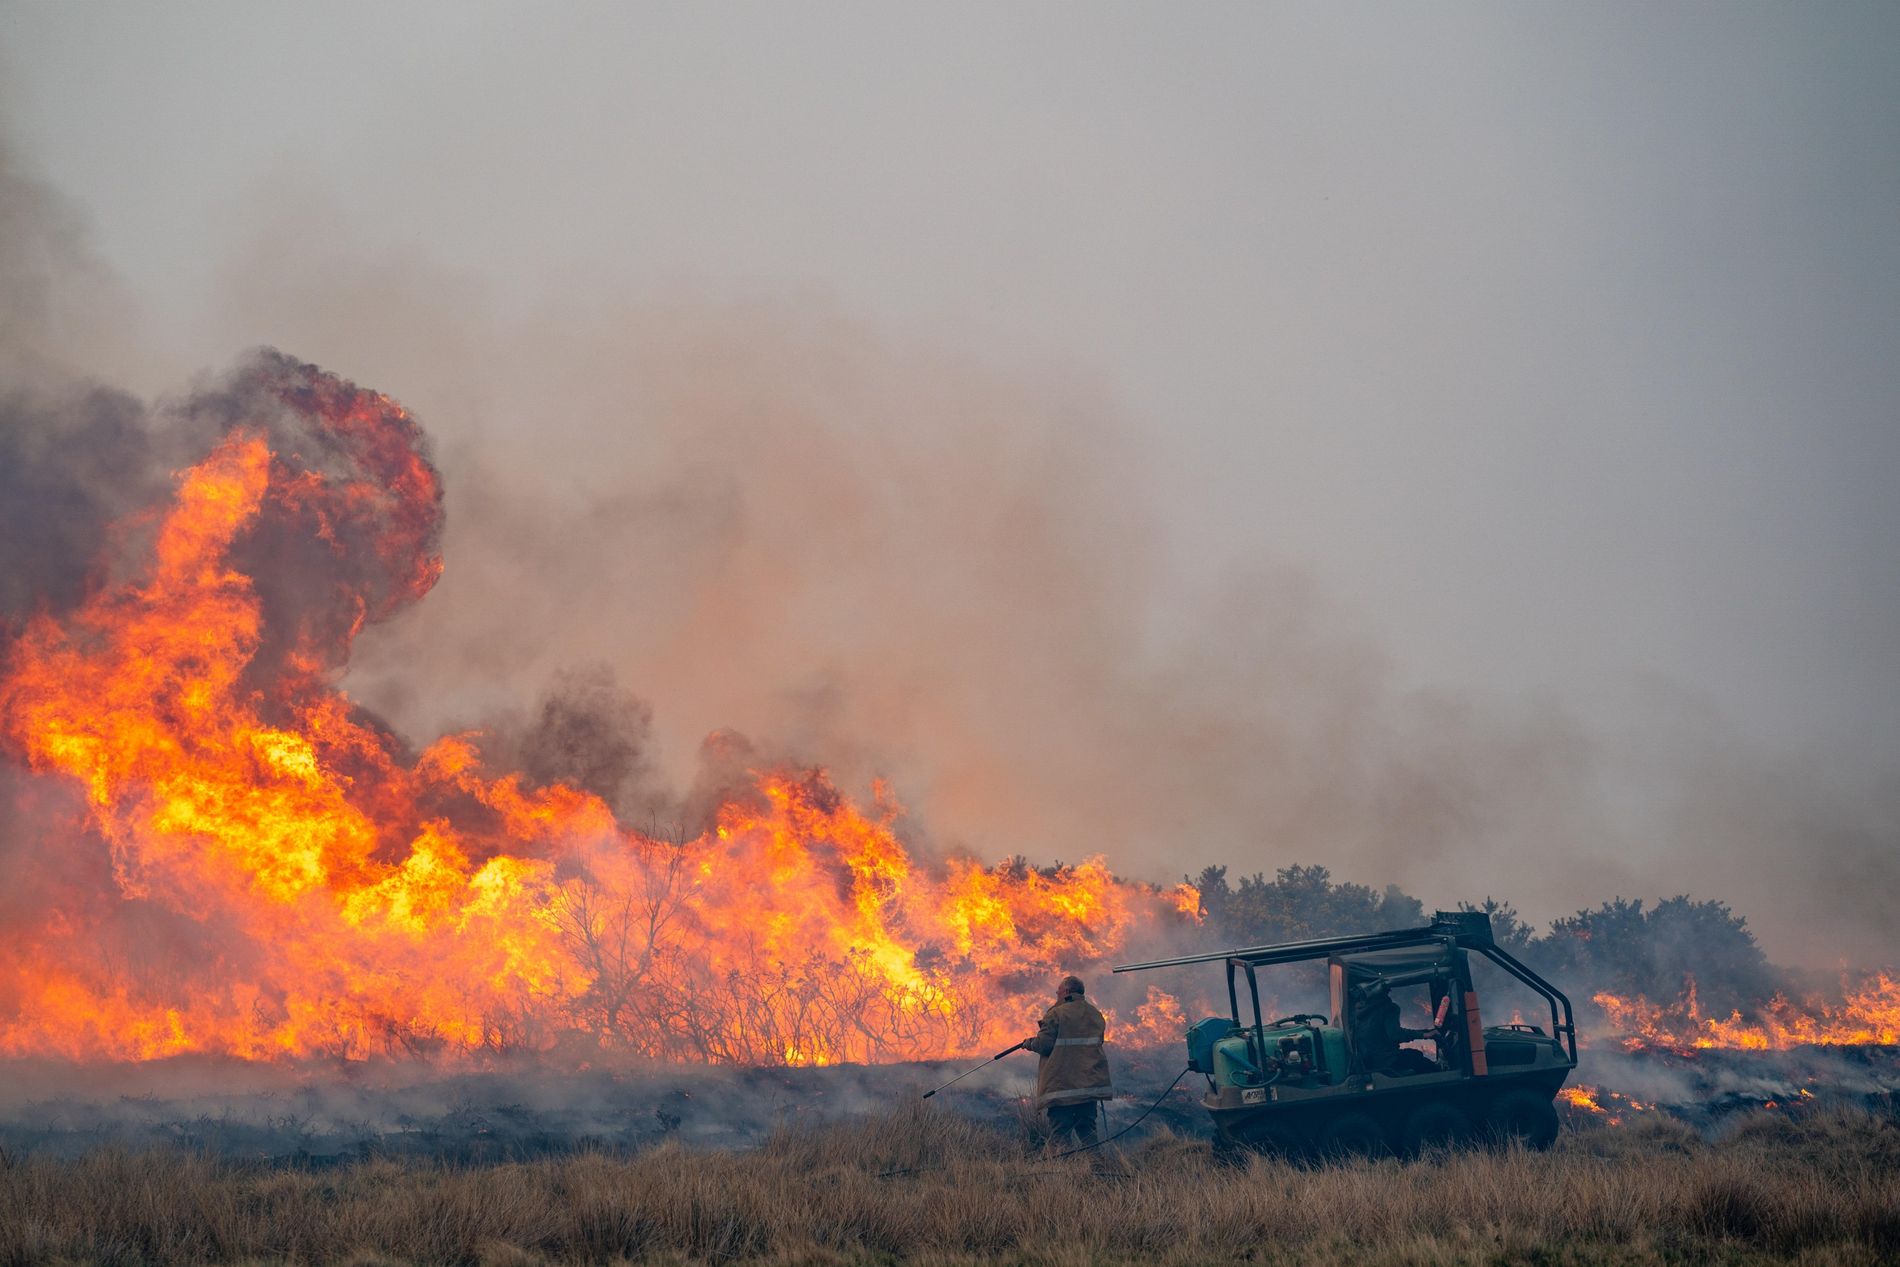 UK Cities Advised To Be Prepared For Wildfire